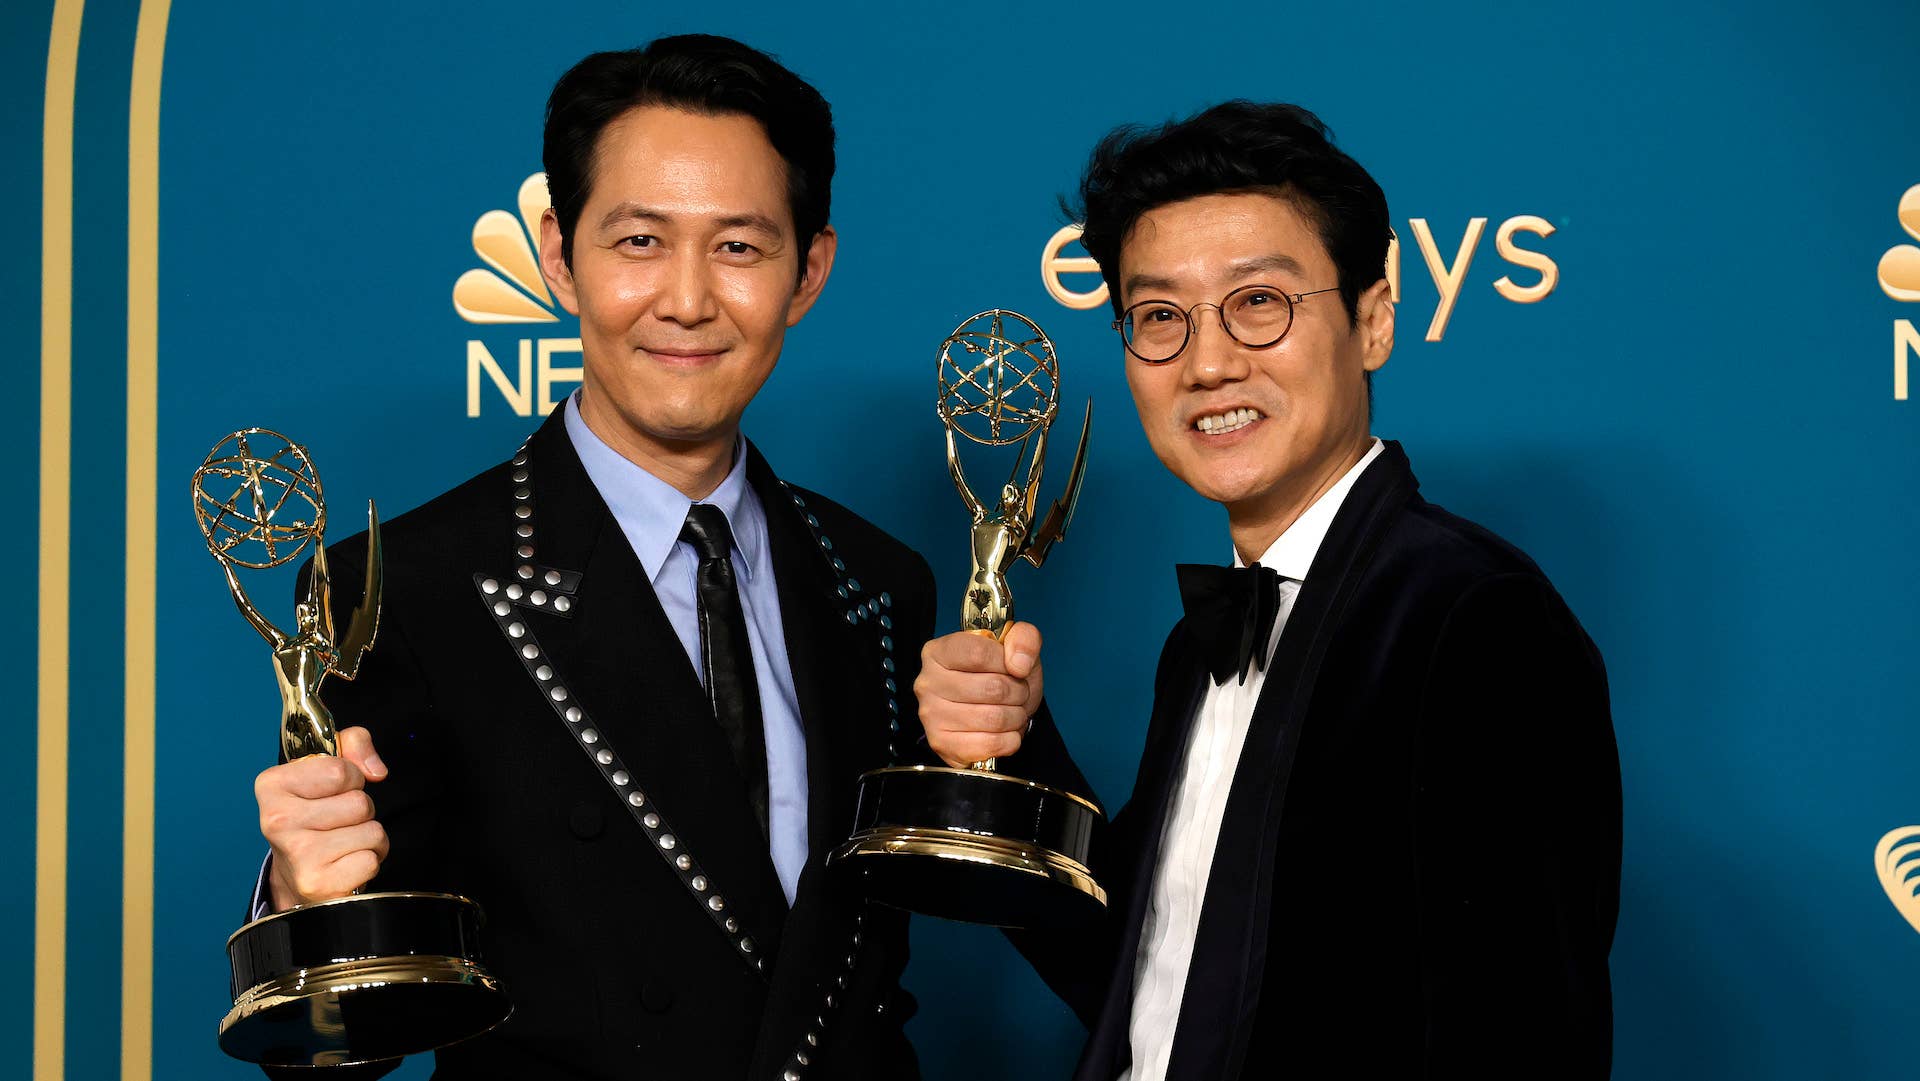 Lee Jung-jae, winner of Outstanding Lead Actor in a Drama Series for "Squid Game" and Hwang Dong-hyuk, winner of Outstanding Directing For A Drama Series for "Squid Game"